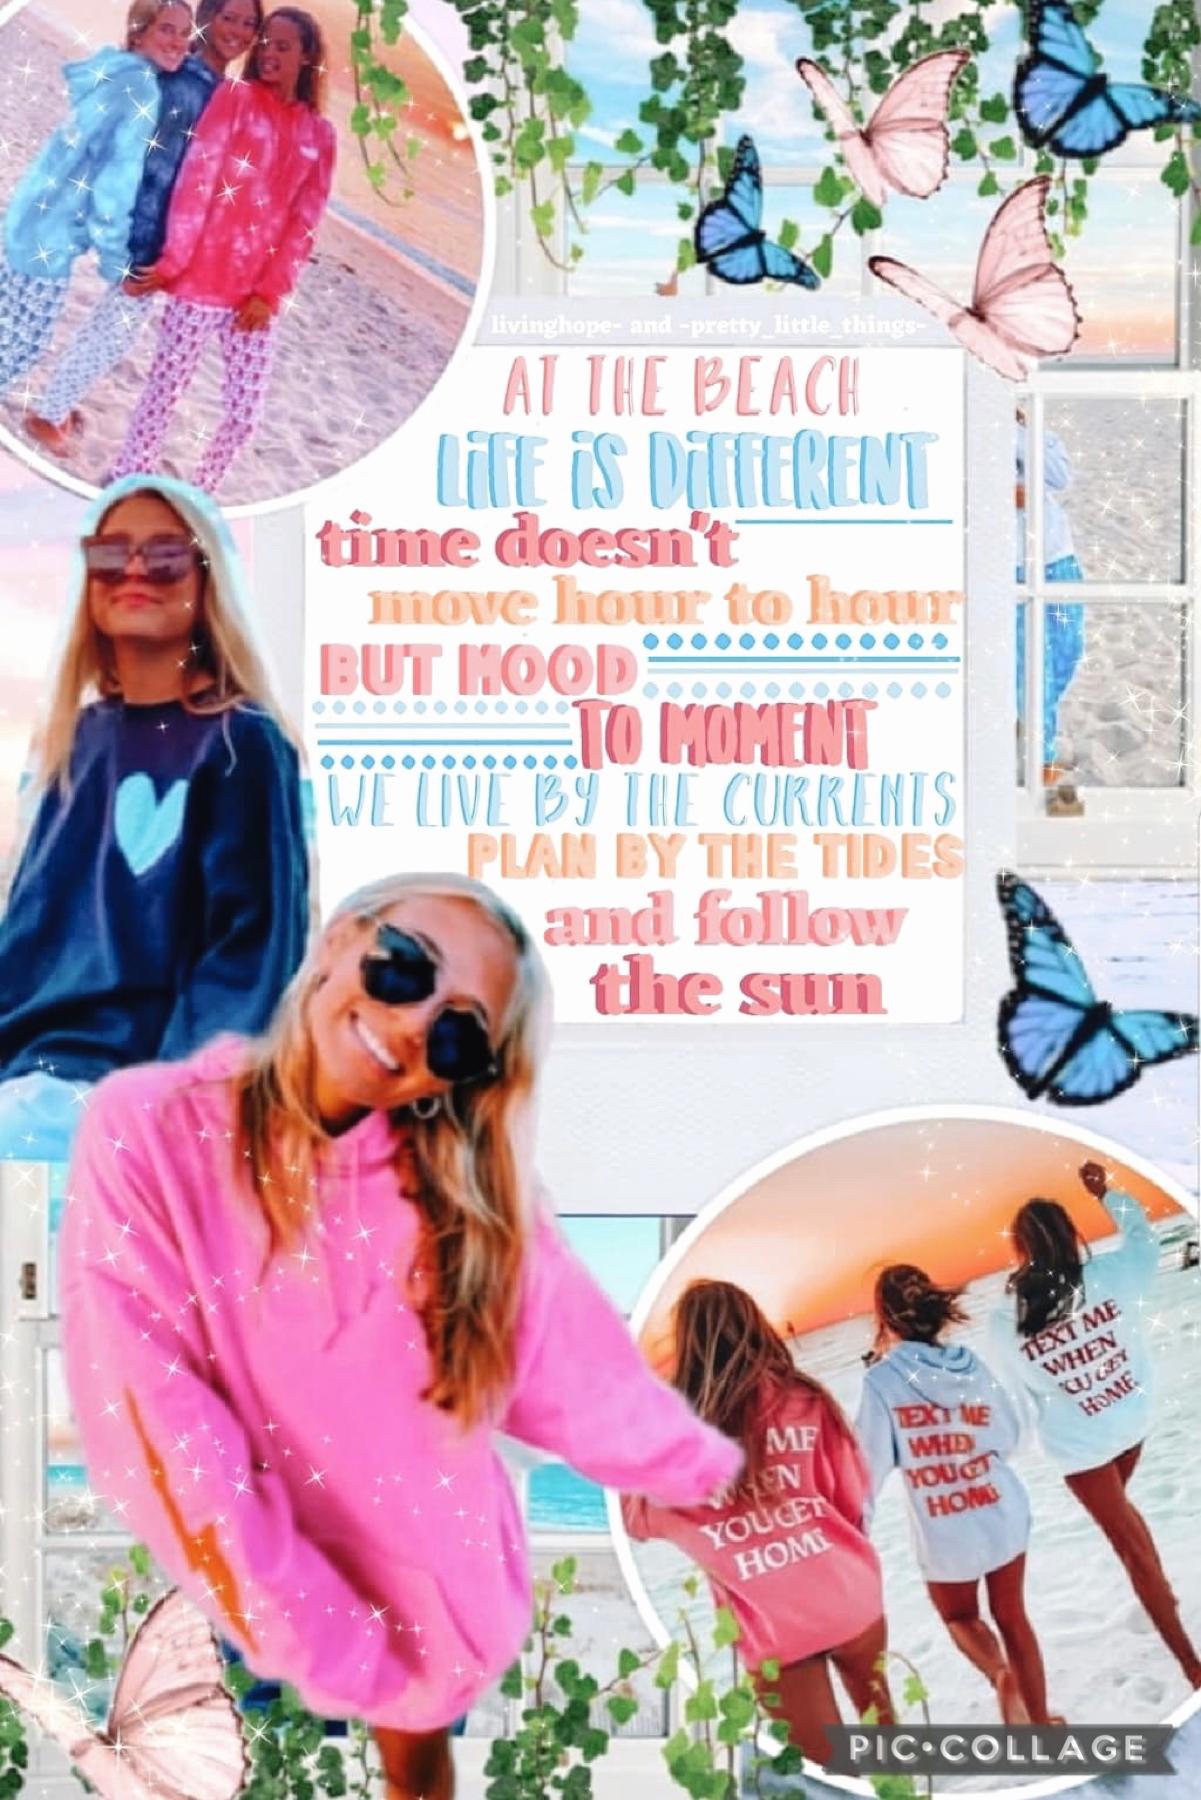 click for collab!
with the amazing livinghope- absolutely LOVE this collab she did the text go give her a follow💖 and do you guys like preppy or should i go back to peachy?
